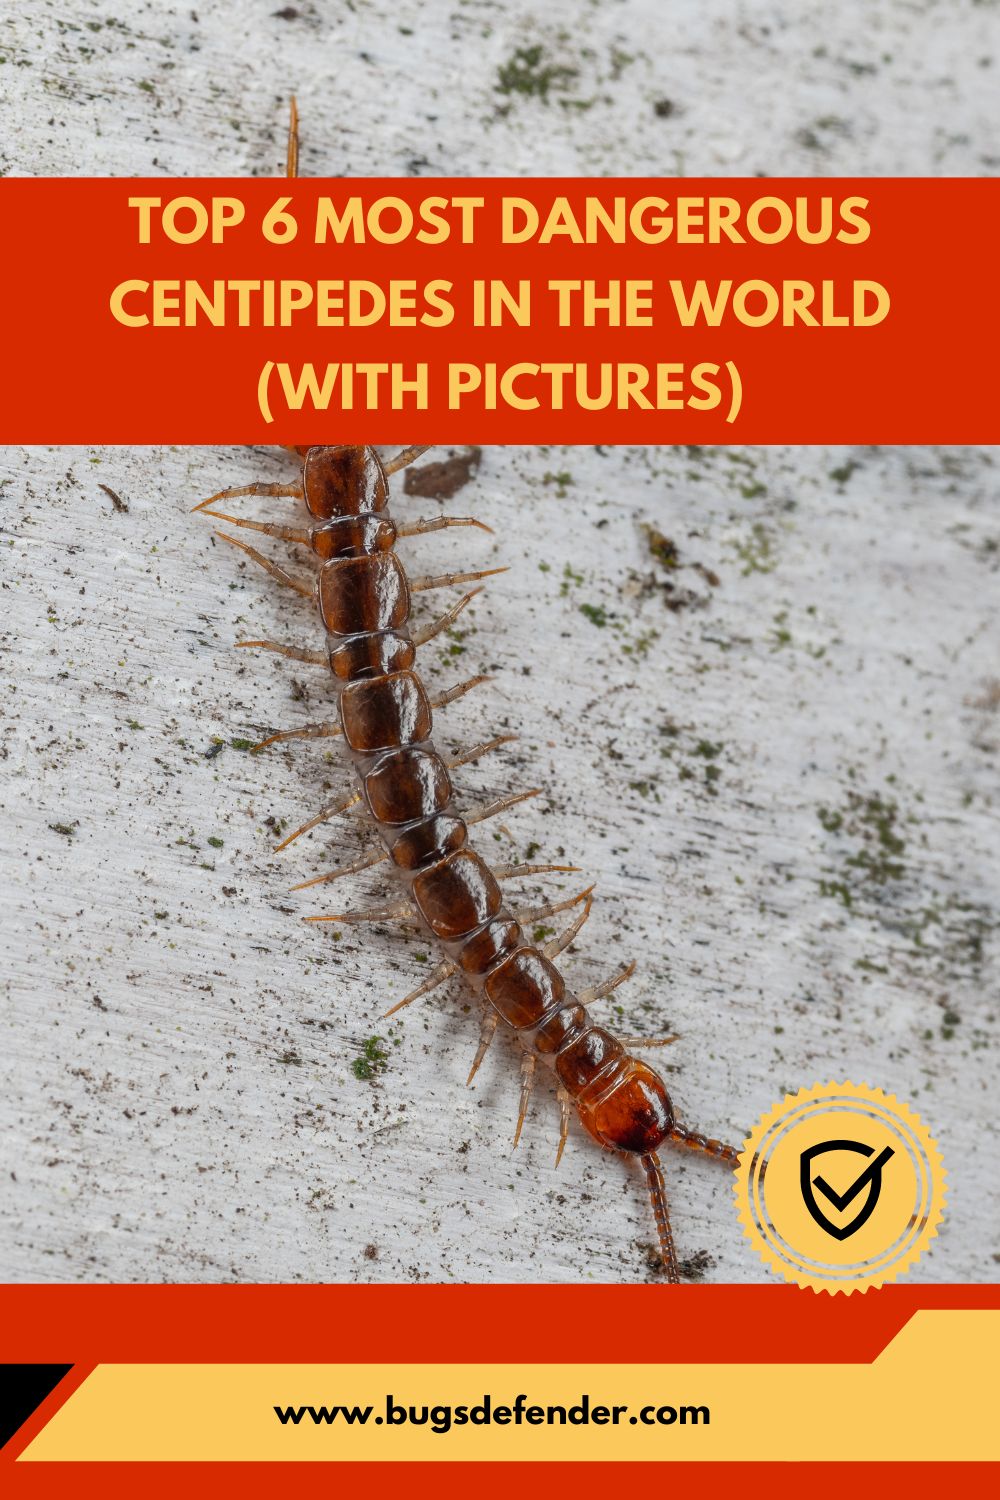 Top 6 Most Dangerous Centipedes in the World pin2